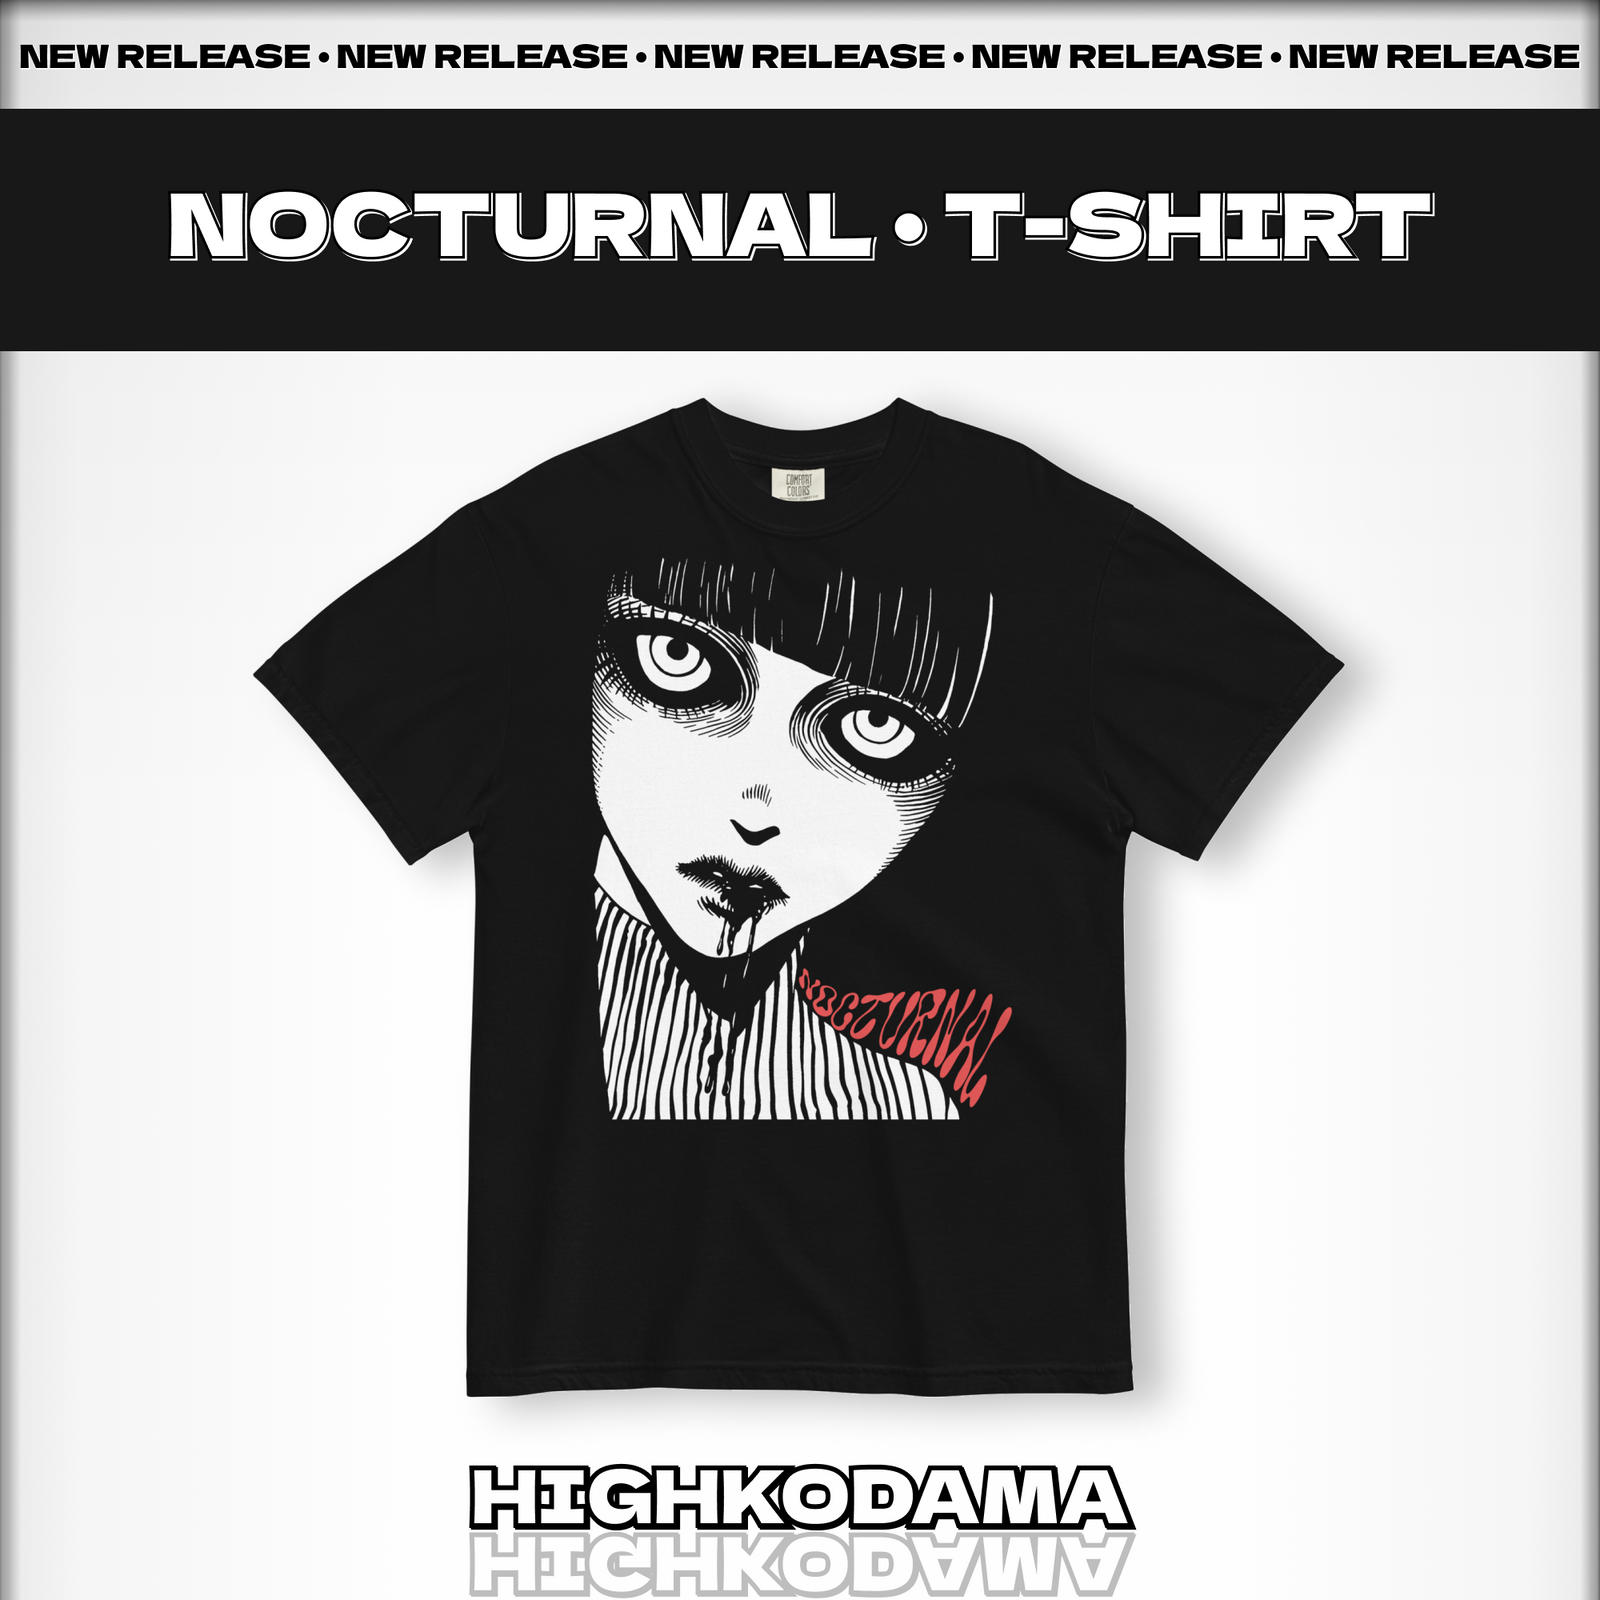 Black unisex heavyweight T-shirt featuring a haunting anime girl in horror style. The girl has a striped shirt and blood dripping from her mouth, with a creepy stare that adds a chilling touch to the design.